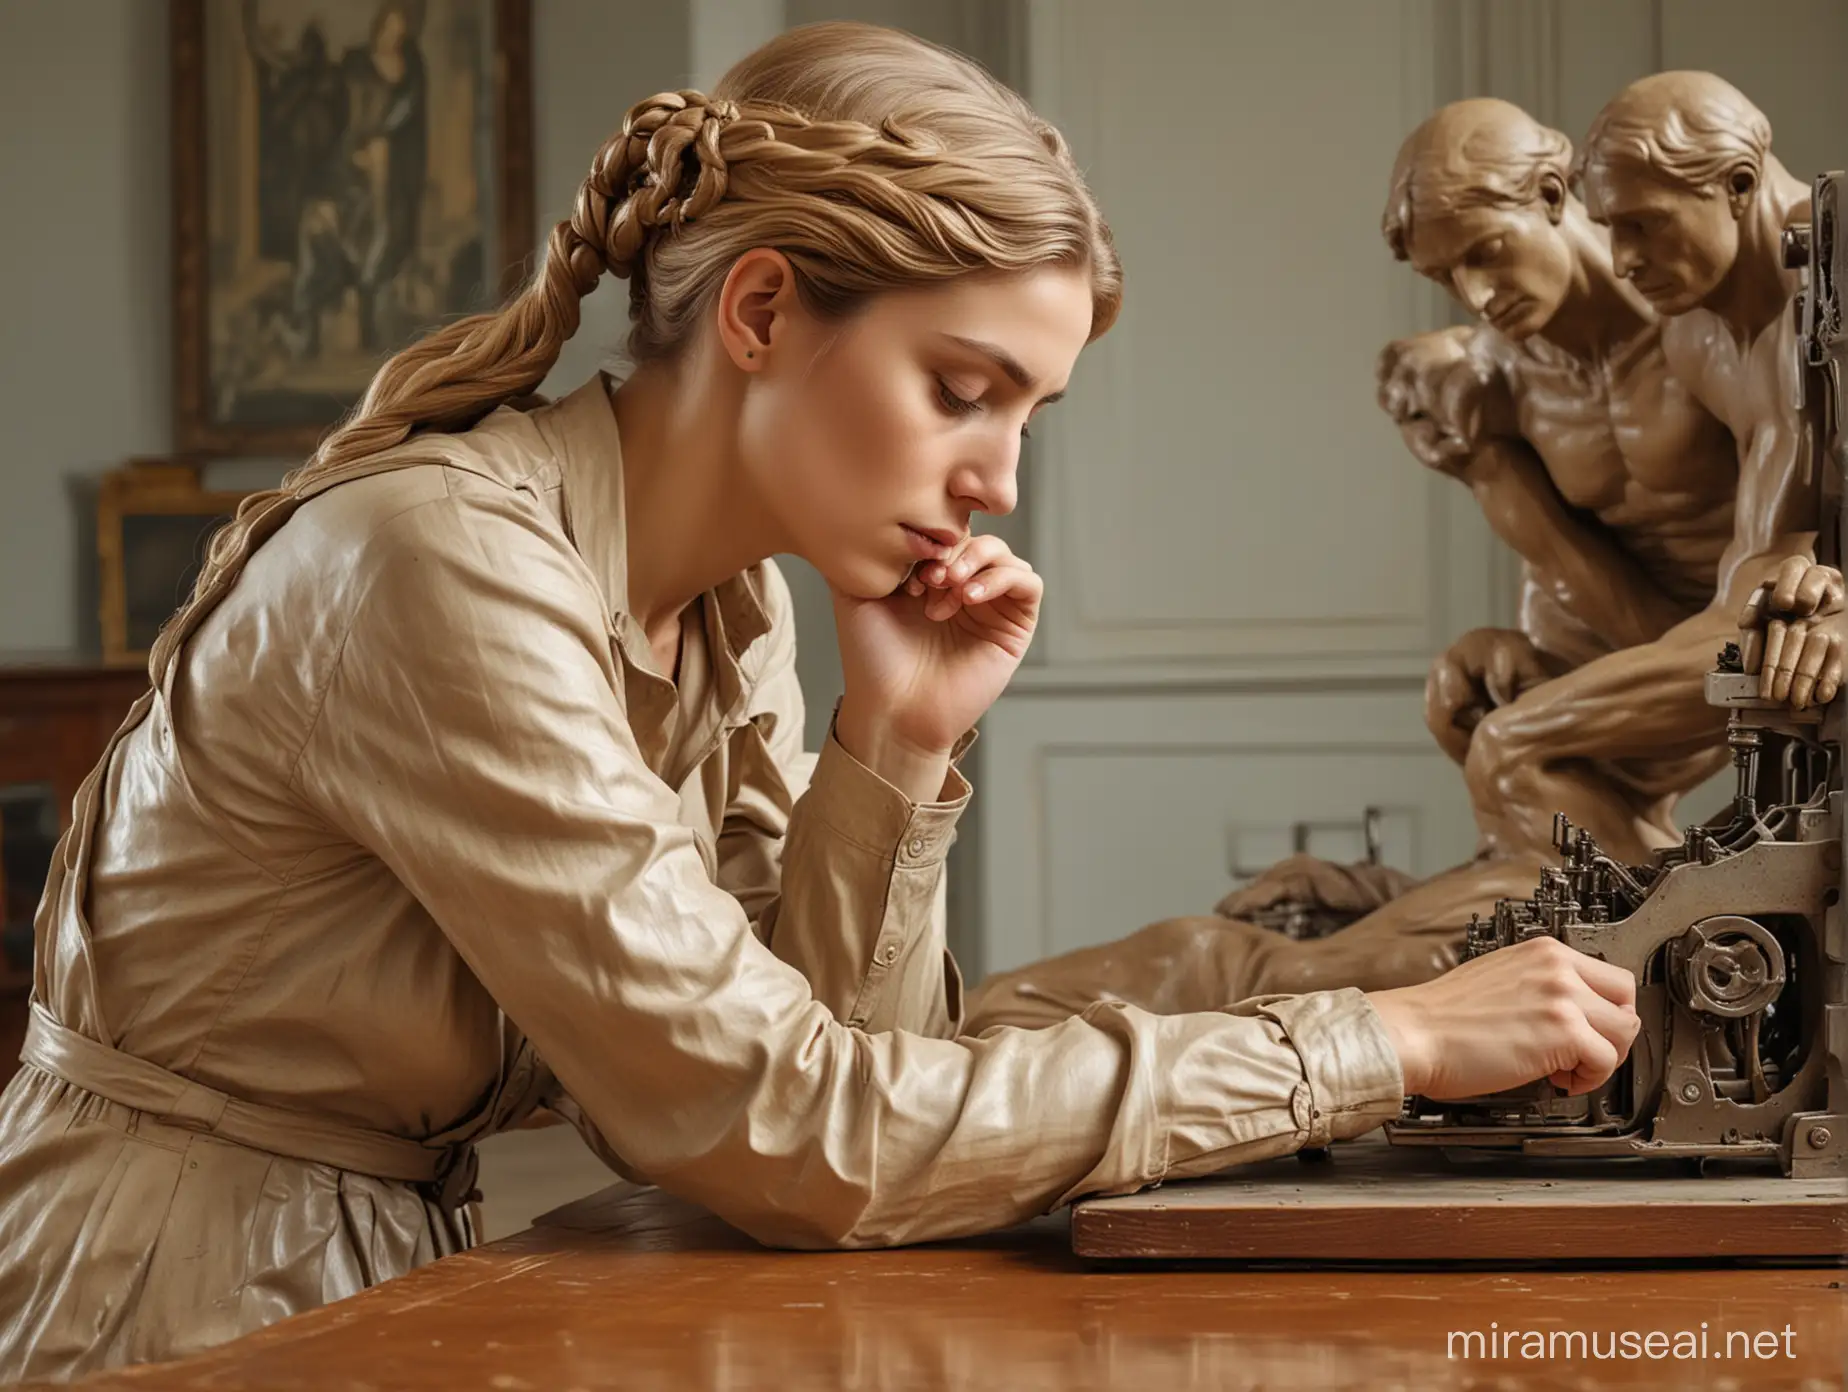 Contemplative Woman Engaging with AI Machine at Vintage Desk